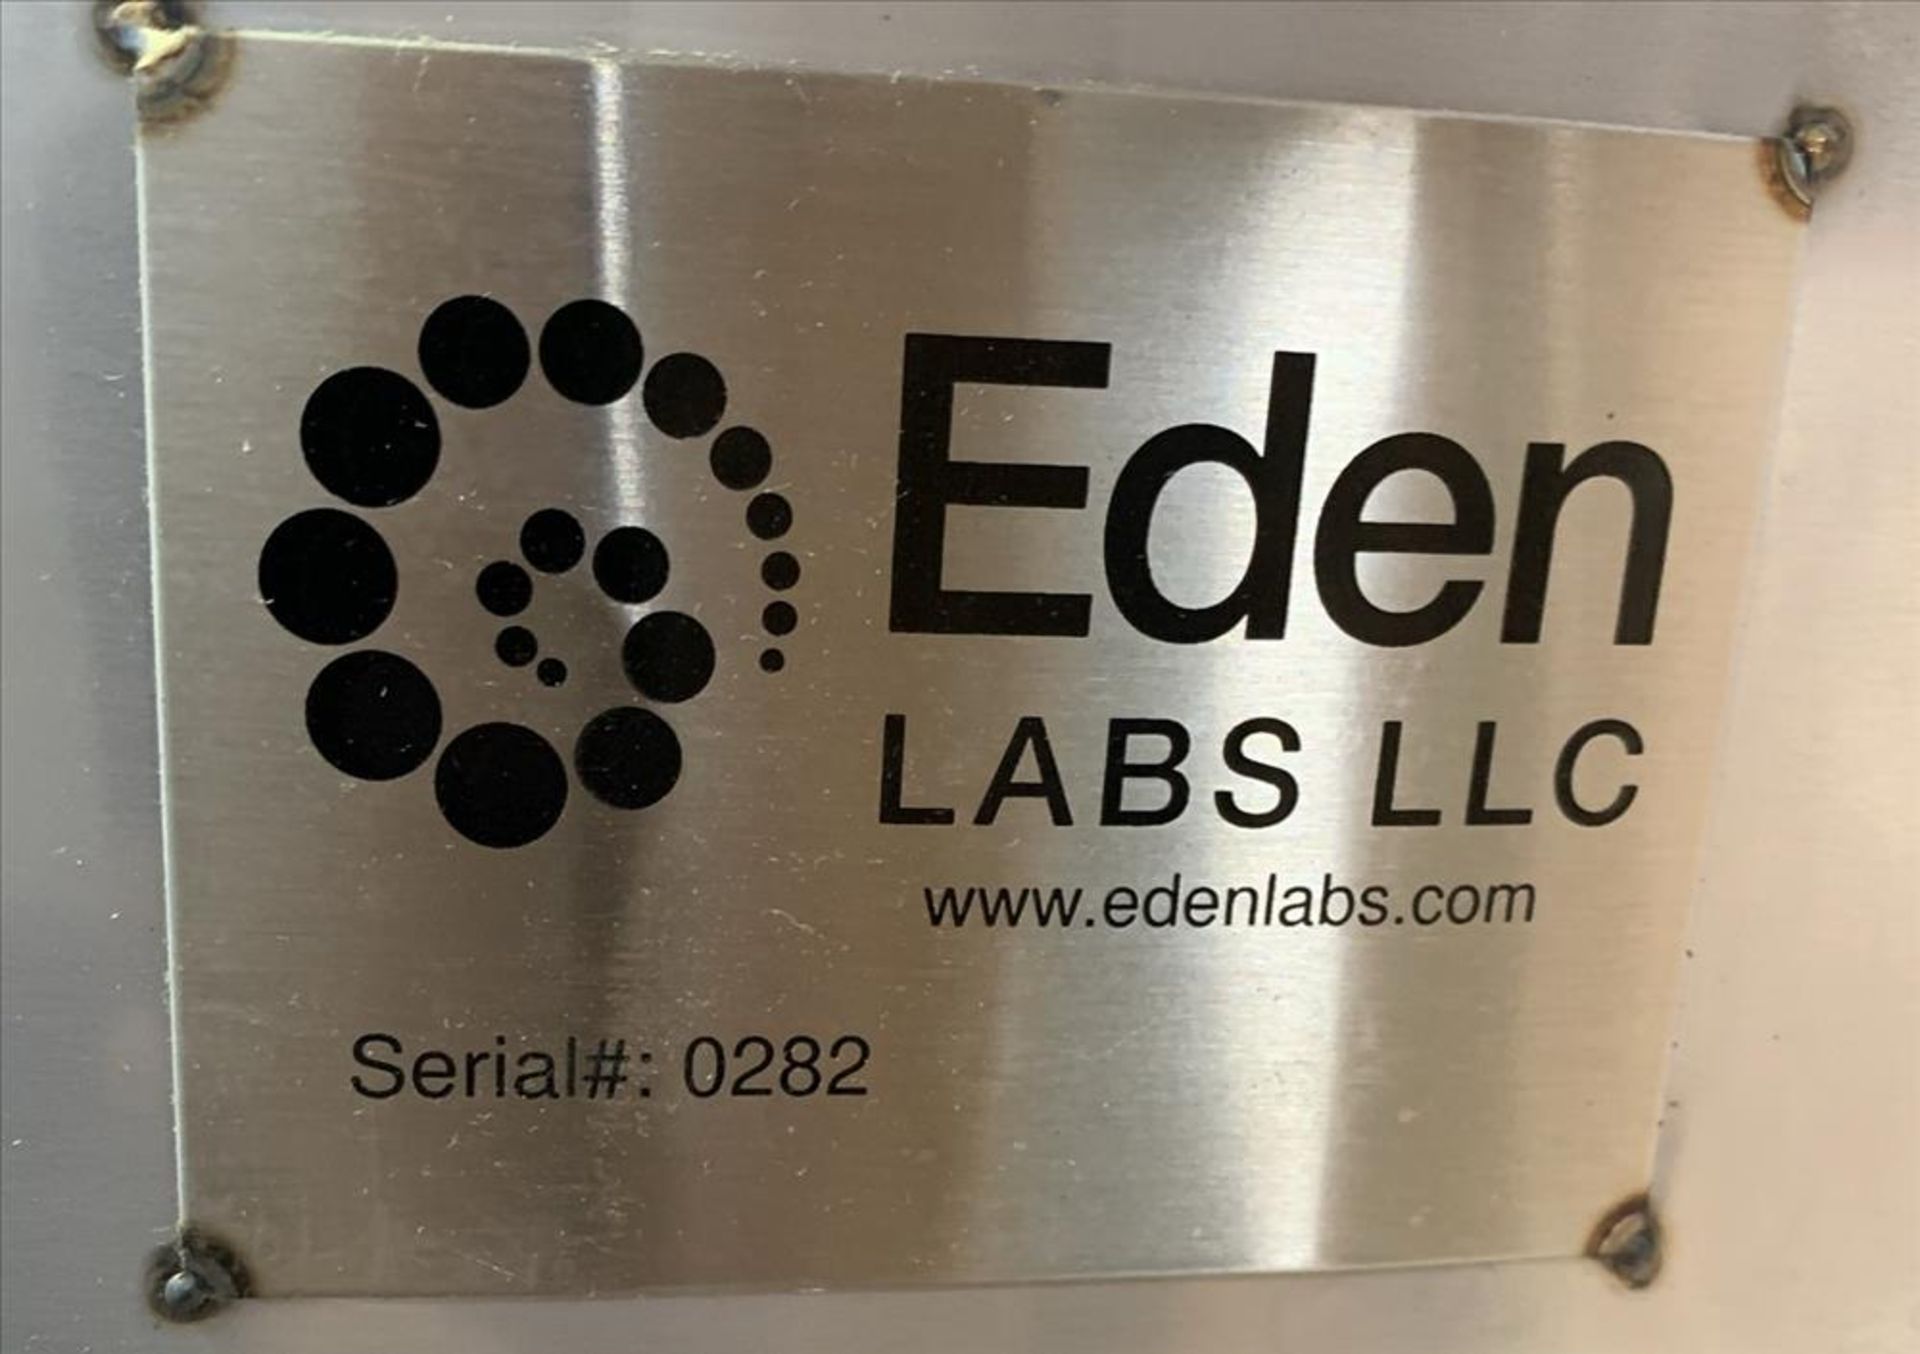 New In Crates - Eden Labs LLC Industrial 500 Gallon Performance Solvent Recovery System - Image 16 of 152